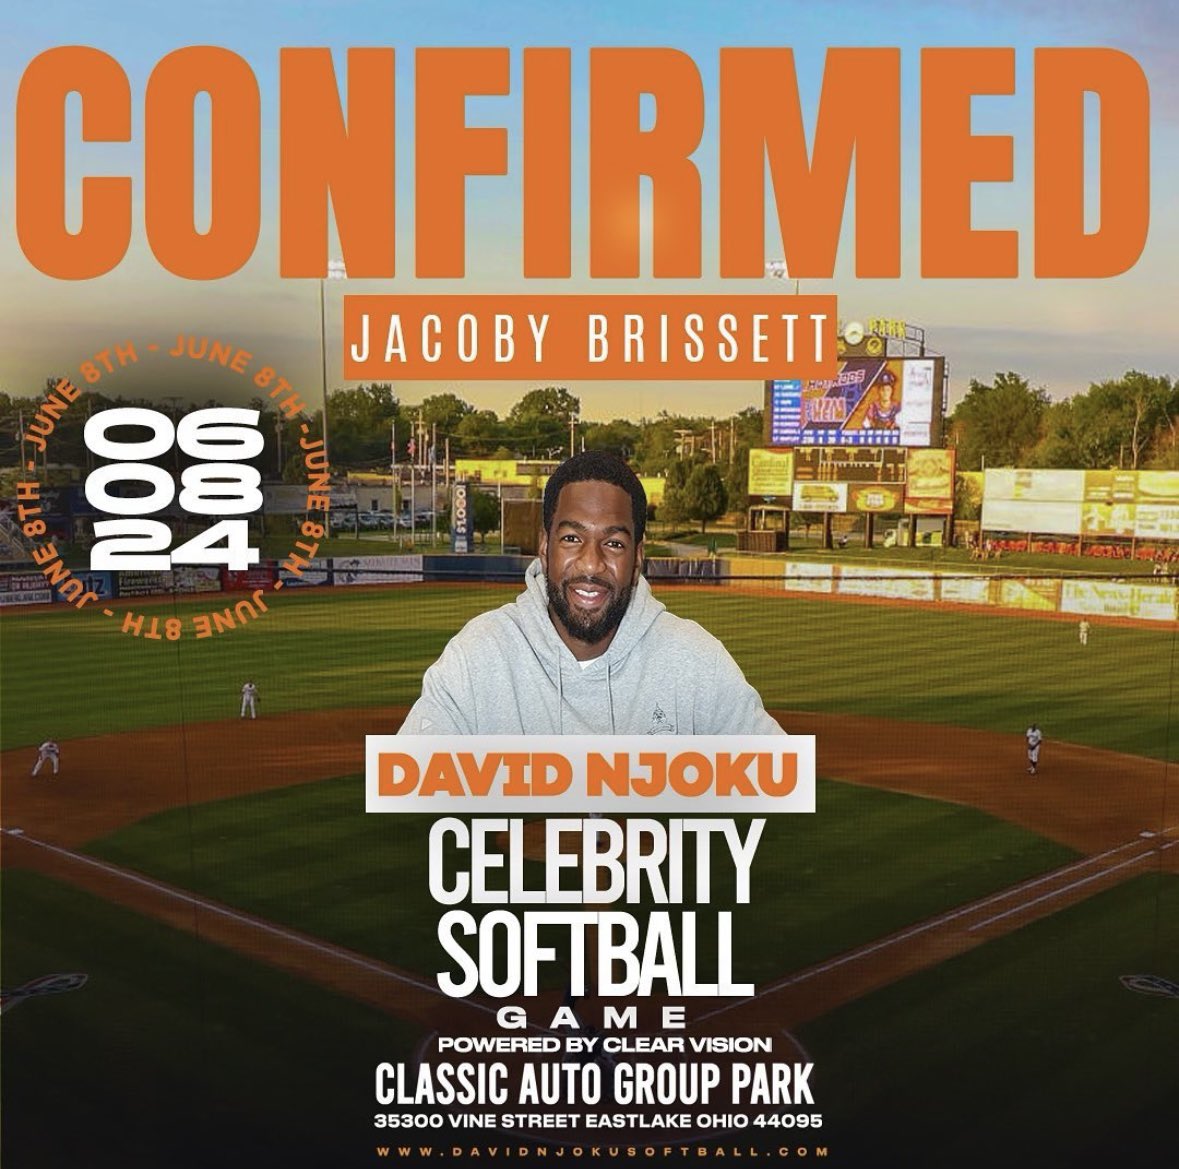 Former #Browns QB Jacoby Brissett confirmed to be at @David_Njoku80 celebrity softball game. 

Love this. Will always have a soft spot for what Brissett did when in Cleveland.